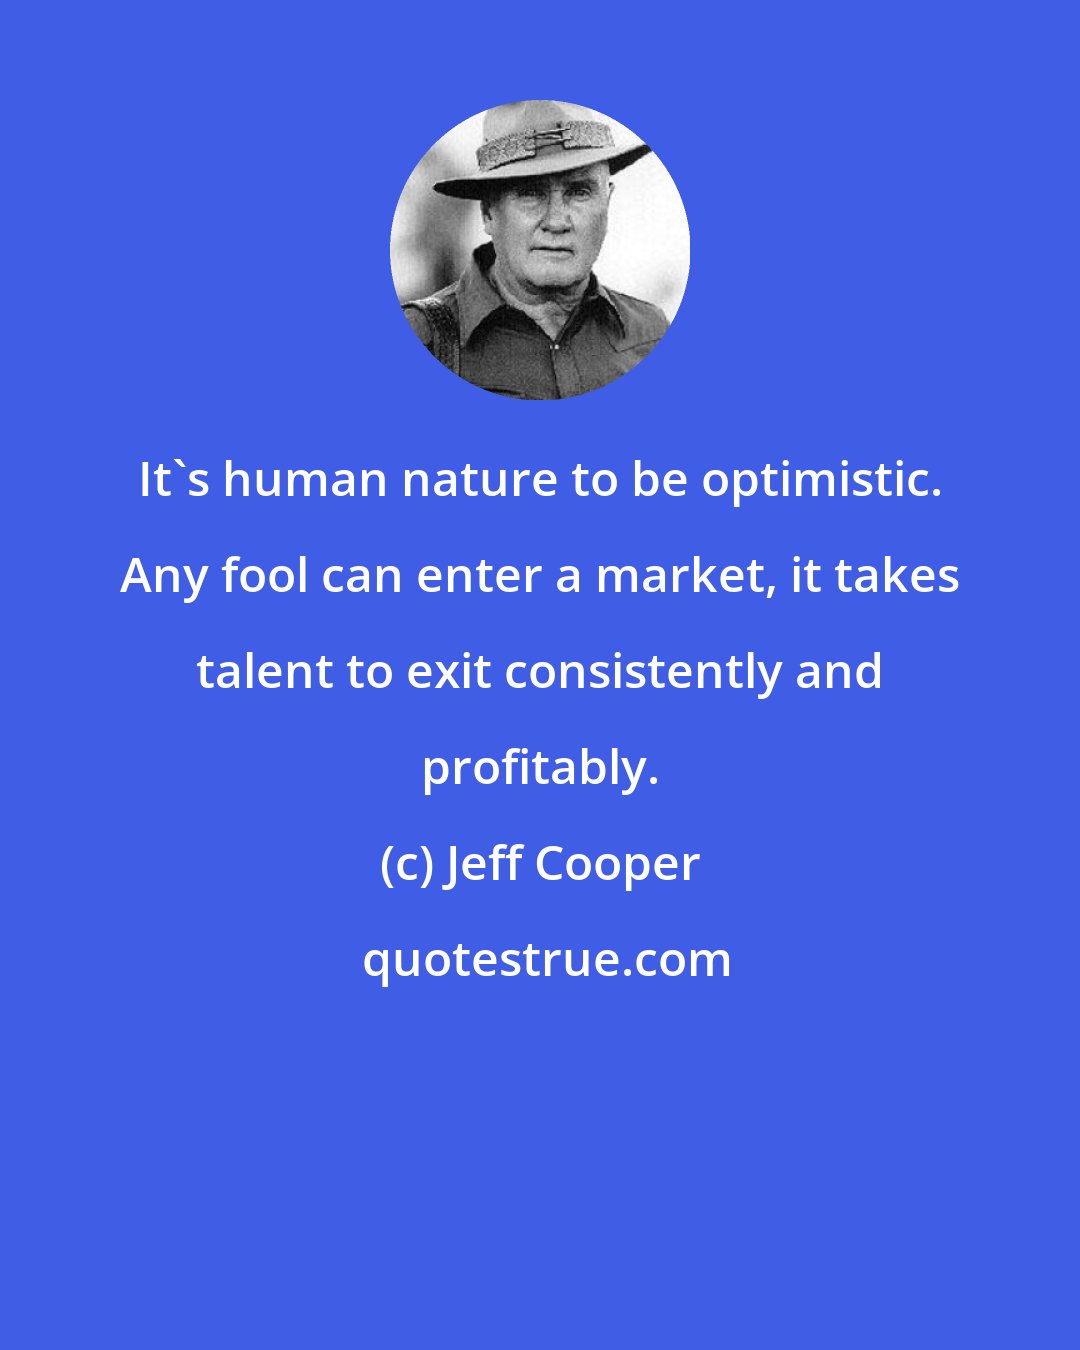 Jeff Cooper: It`s human nature to be optimistic. Any fool can enter a market, it takes talent to exit consistently and profitably.